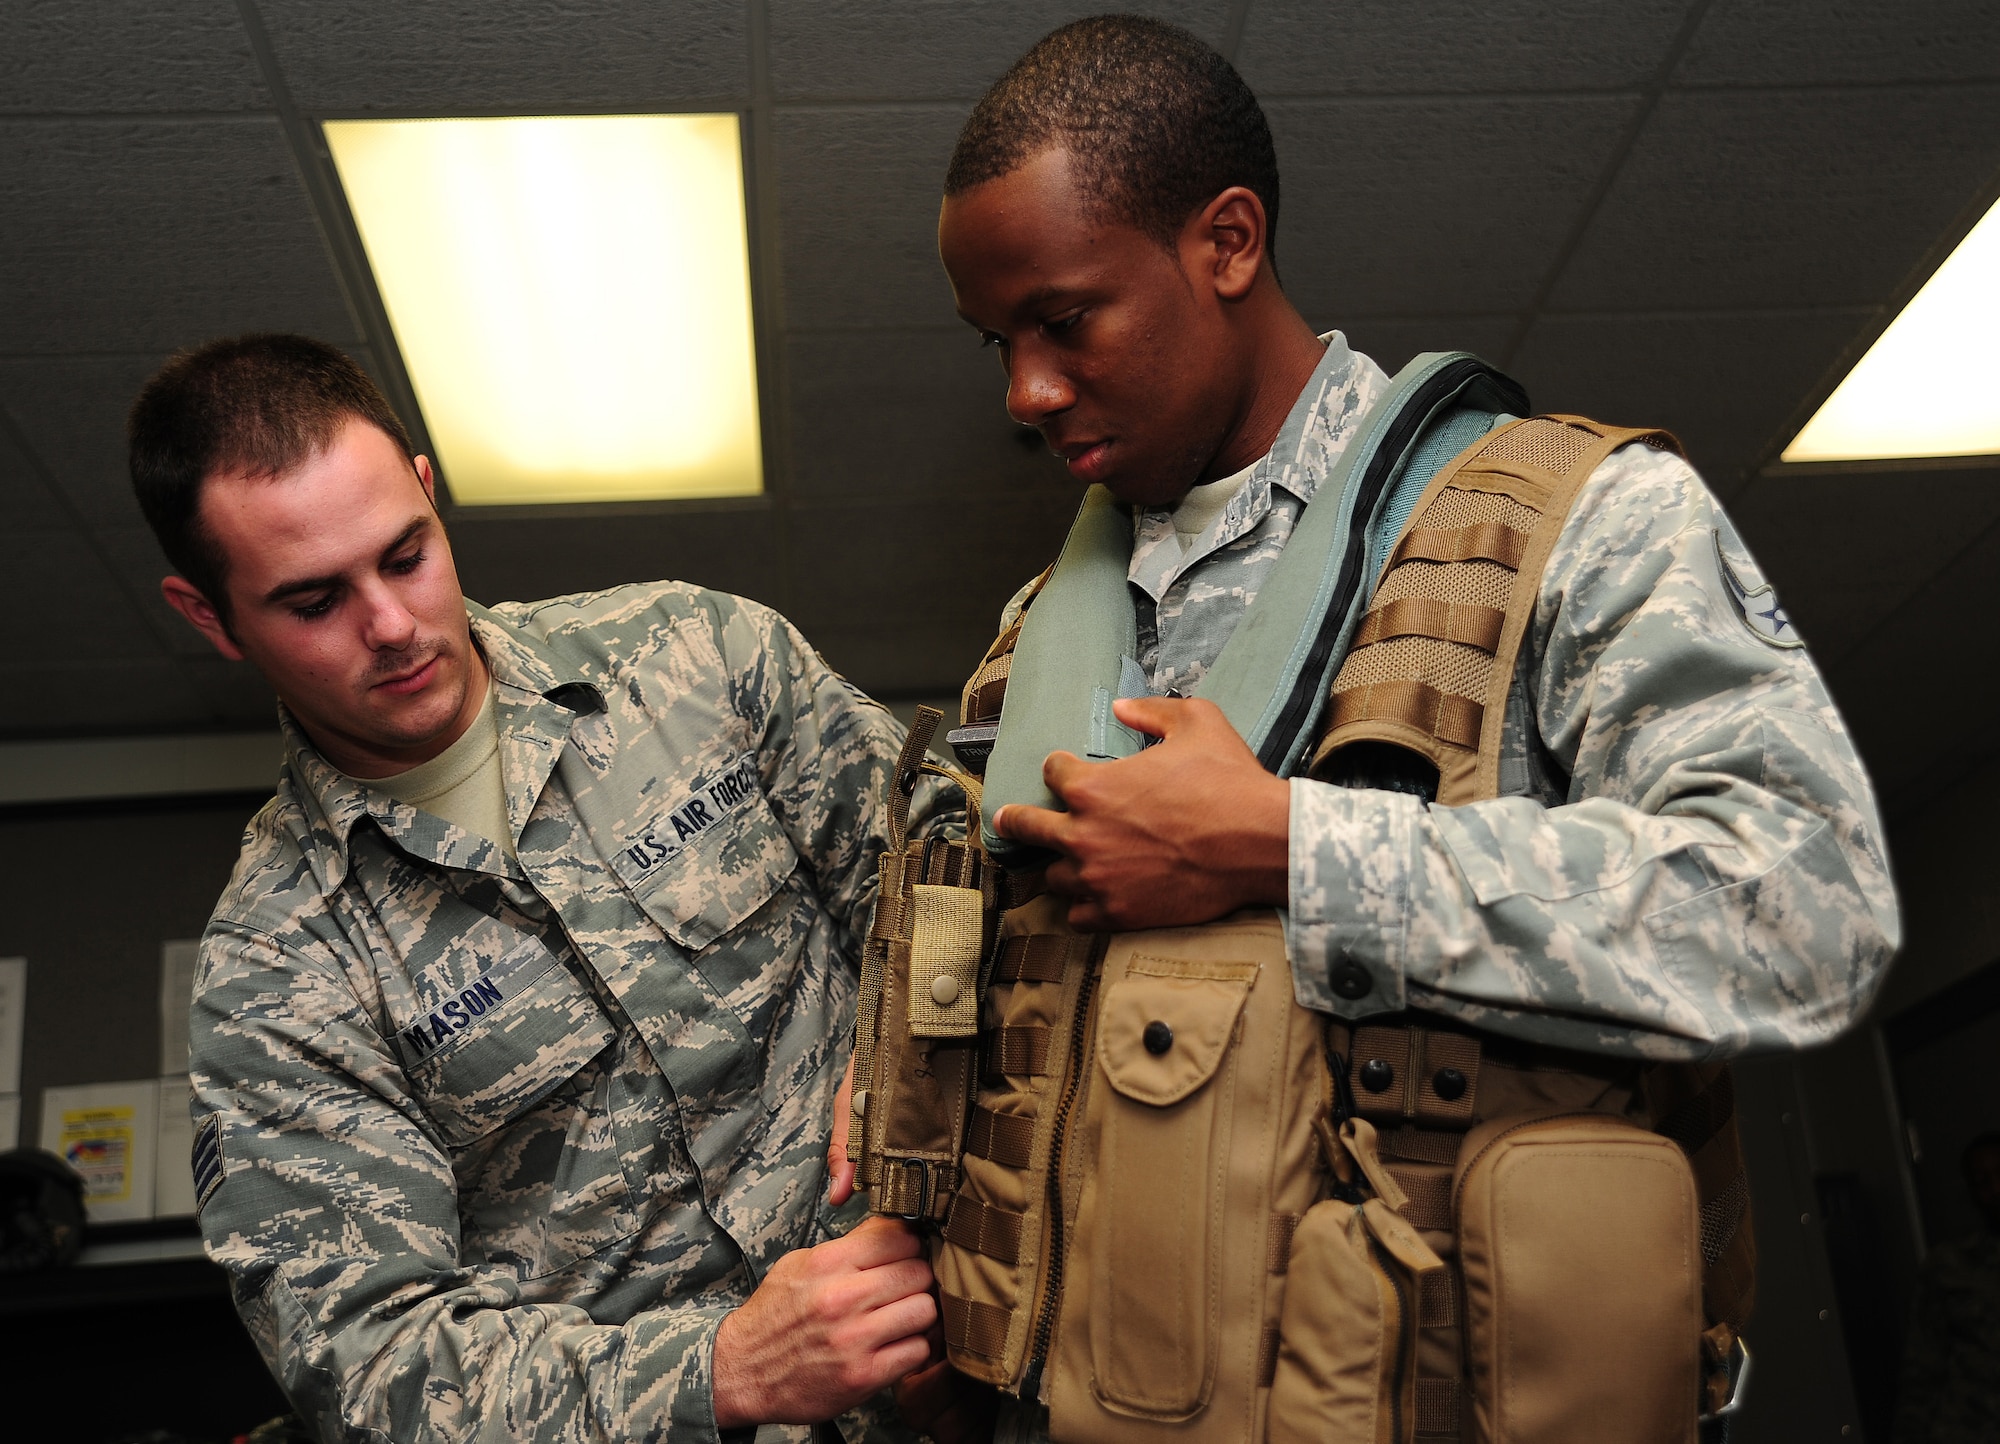 Senior Airman Ethan Mason locks a gun holster onto an Airsave vest as fellow 509th Operations Support Squadron aircrew flight equipment technician Airman 1st Class Dalvin Washington looks on at Whiteman Air Force Base, Mo., July 16, 2013. With a newly interwoven design, the Airsave vest allows aircrew members who wear it to customize equipment attachments to their liking. (U.S. Air Force photo by Staff Sgt. Nick Wilson/Released)